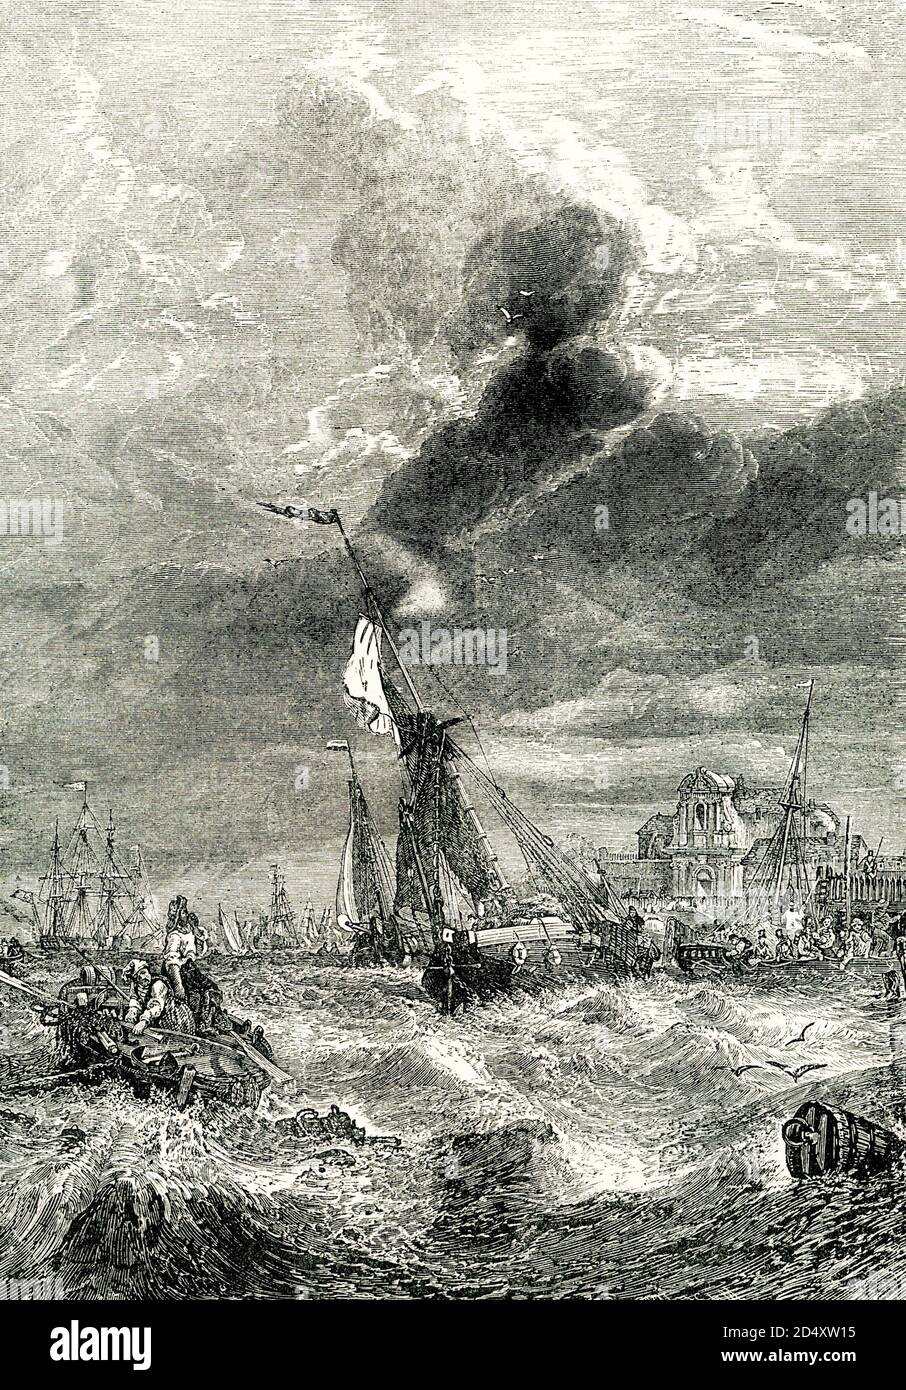 This illustration dates to about 1901 black and white wood engraving of a painting by Clarkson Frederick Stanfield (1793-1867) entitled 'Wind against Tide, the Thames at Tilbury Fort'. Clarkson Frederick Stanfield (1793 – 1867) was a prominent English marine painter, often inaccurately credited as William Clarkson Stanfield. Stock Photo